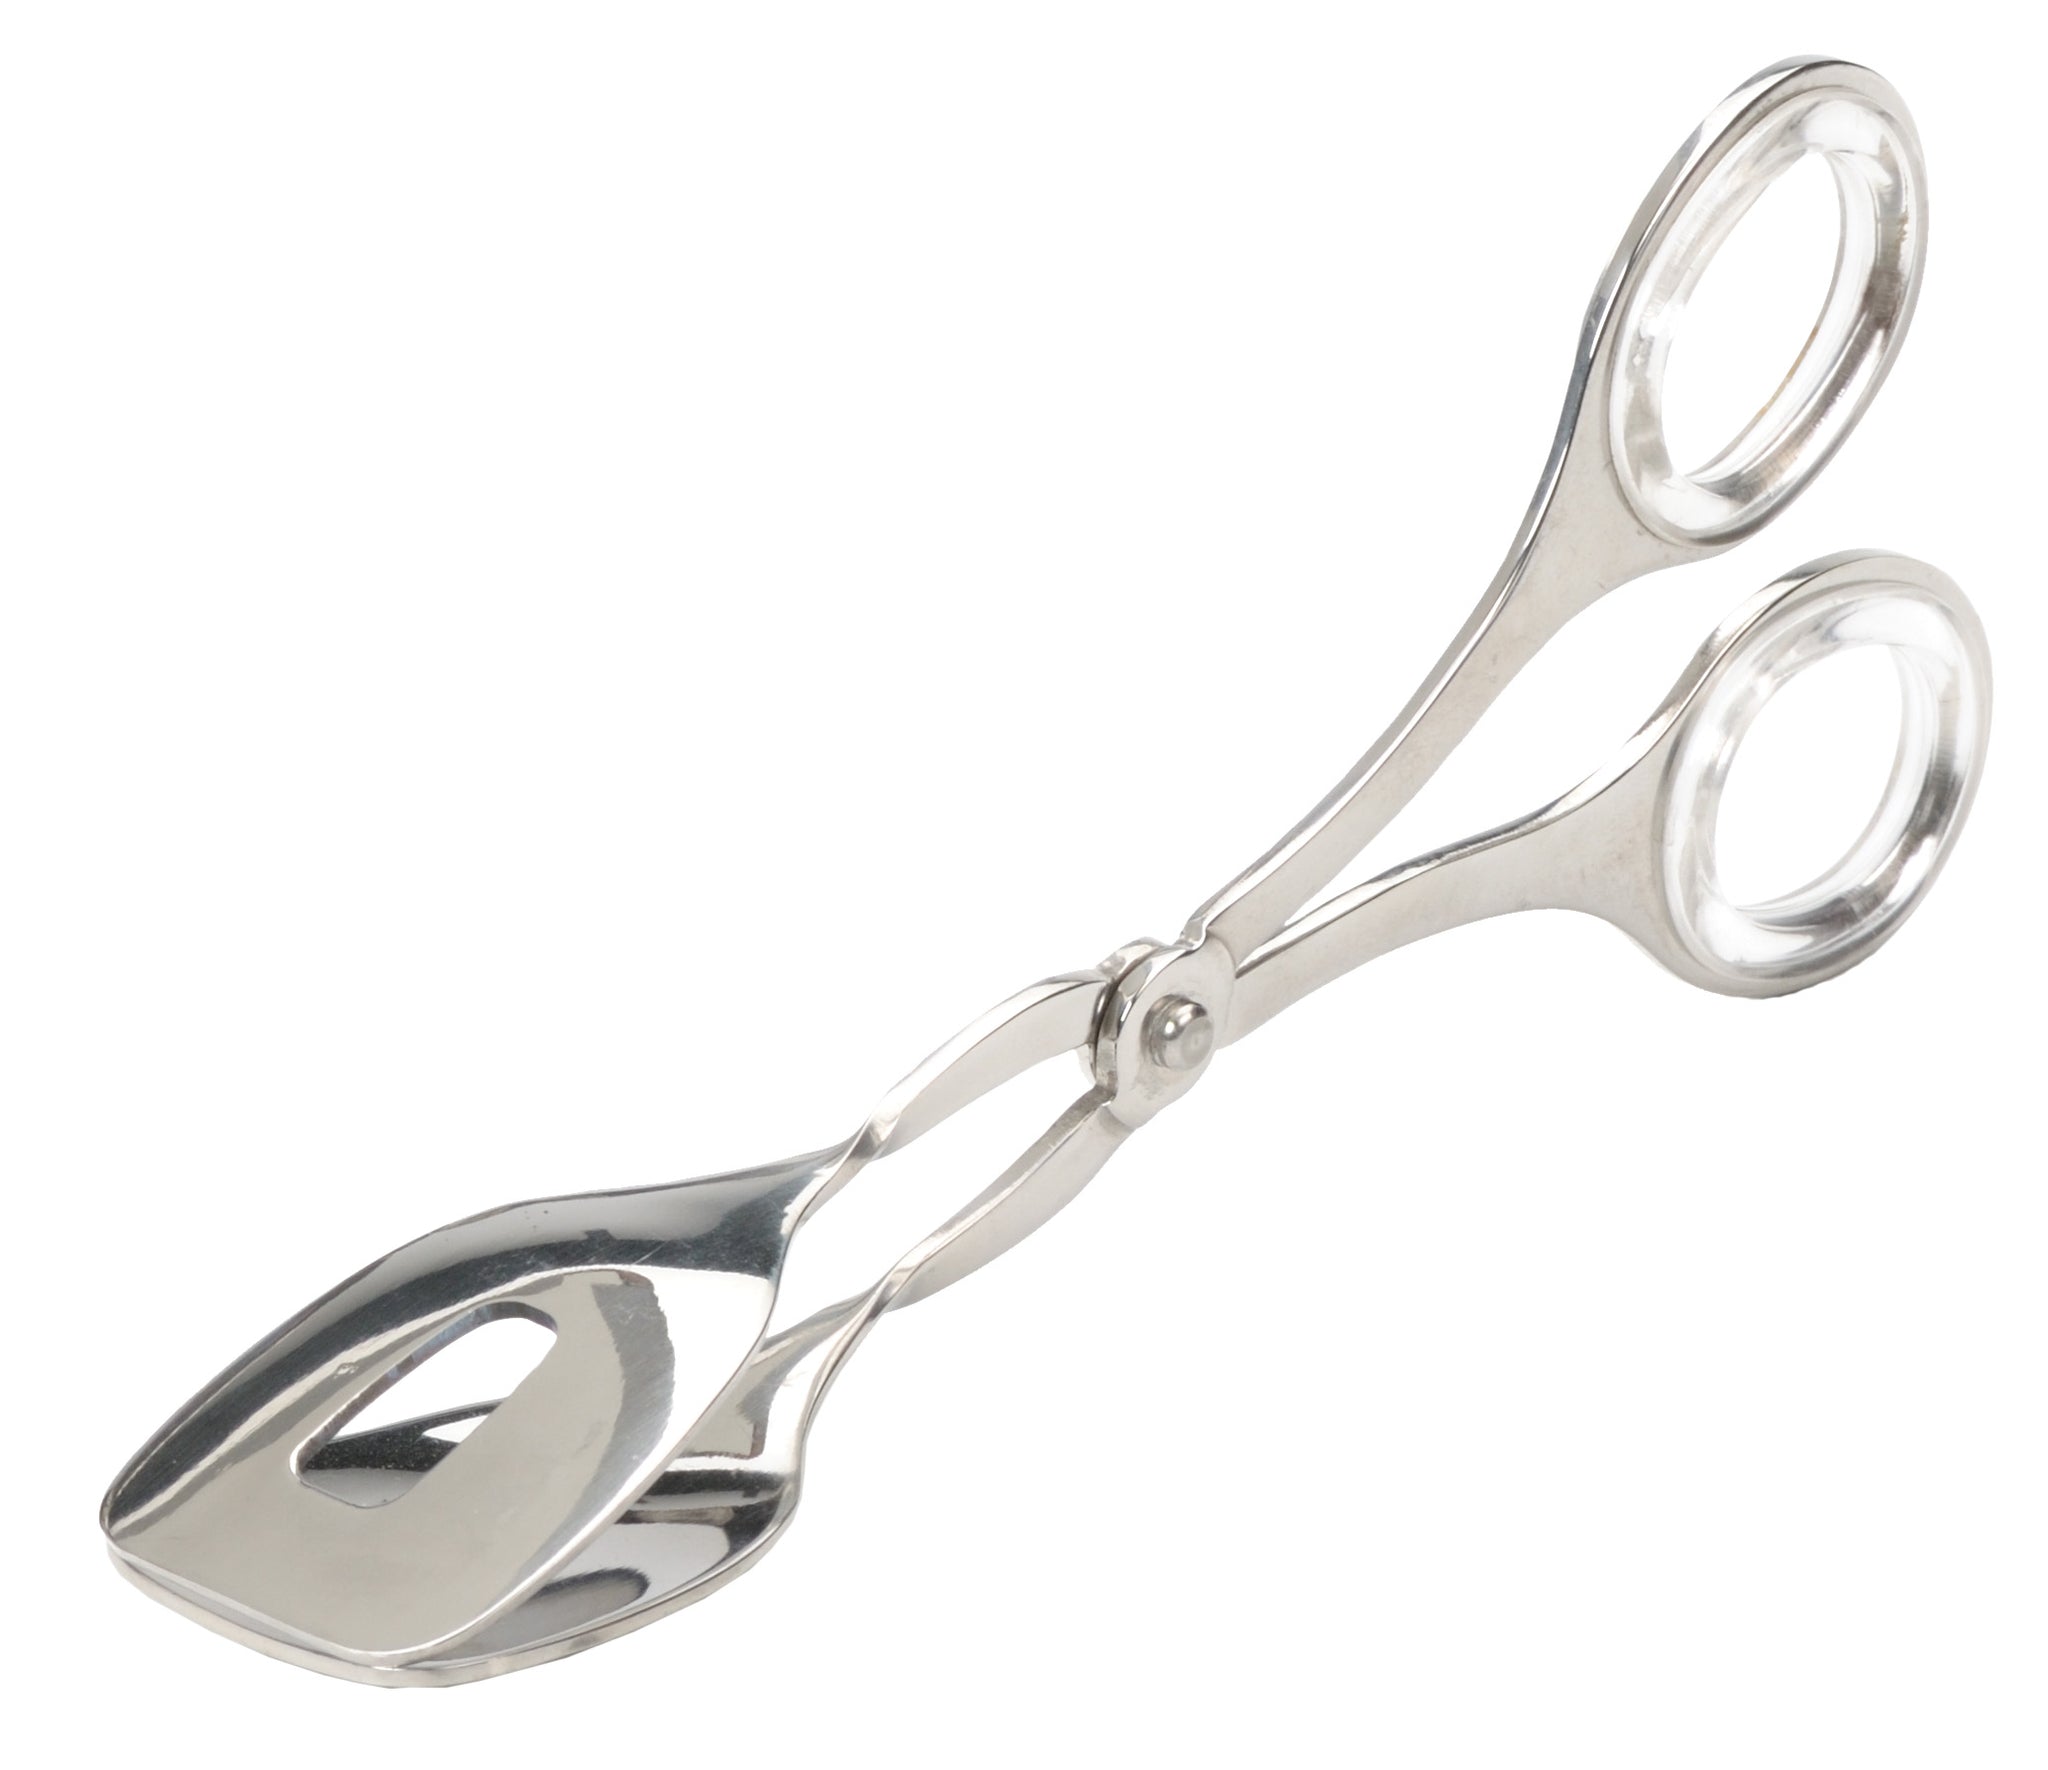 Small Serving Tongs